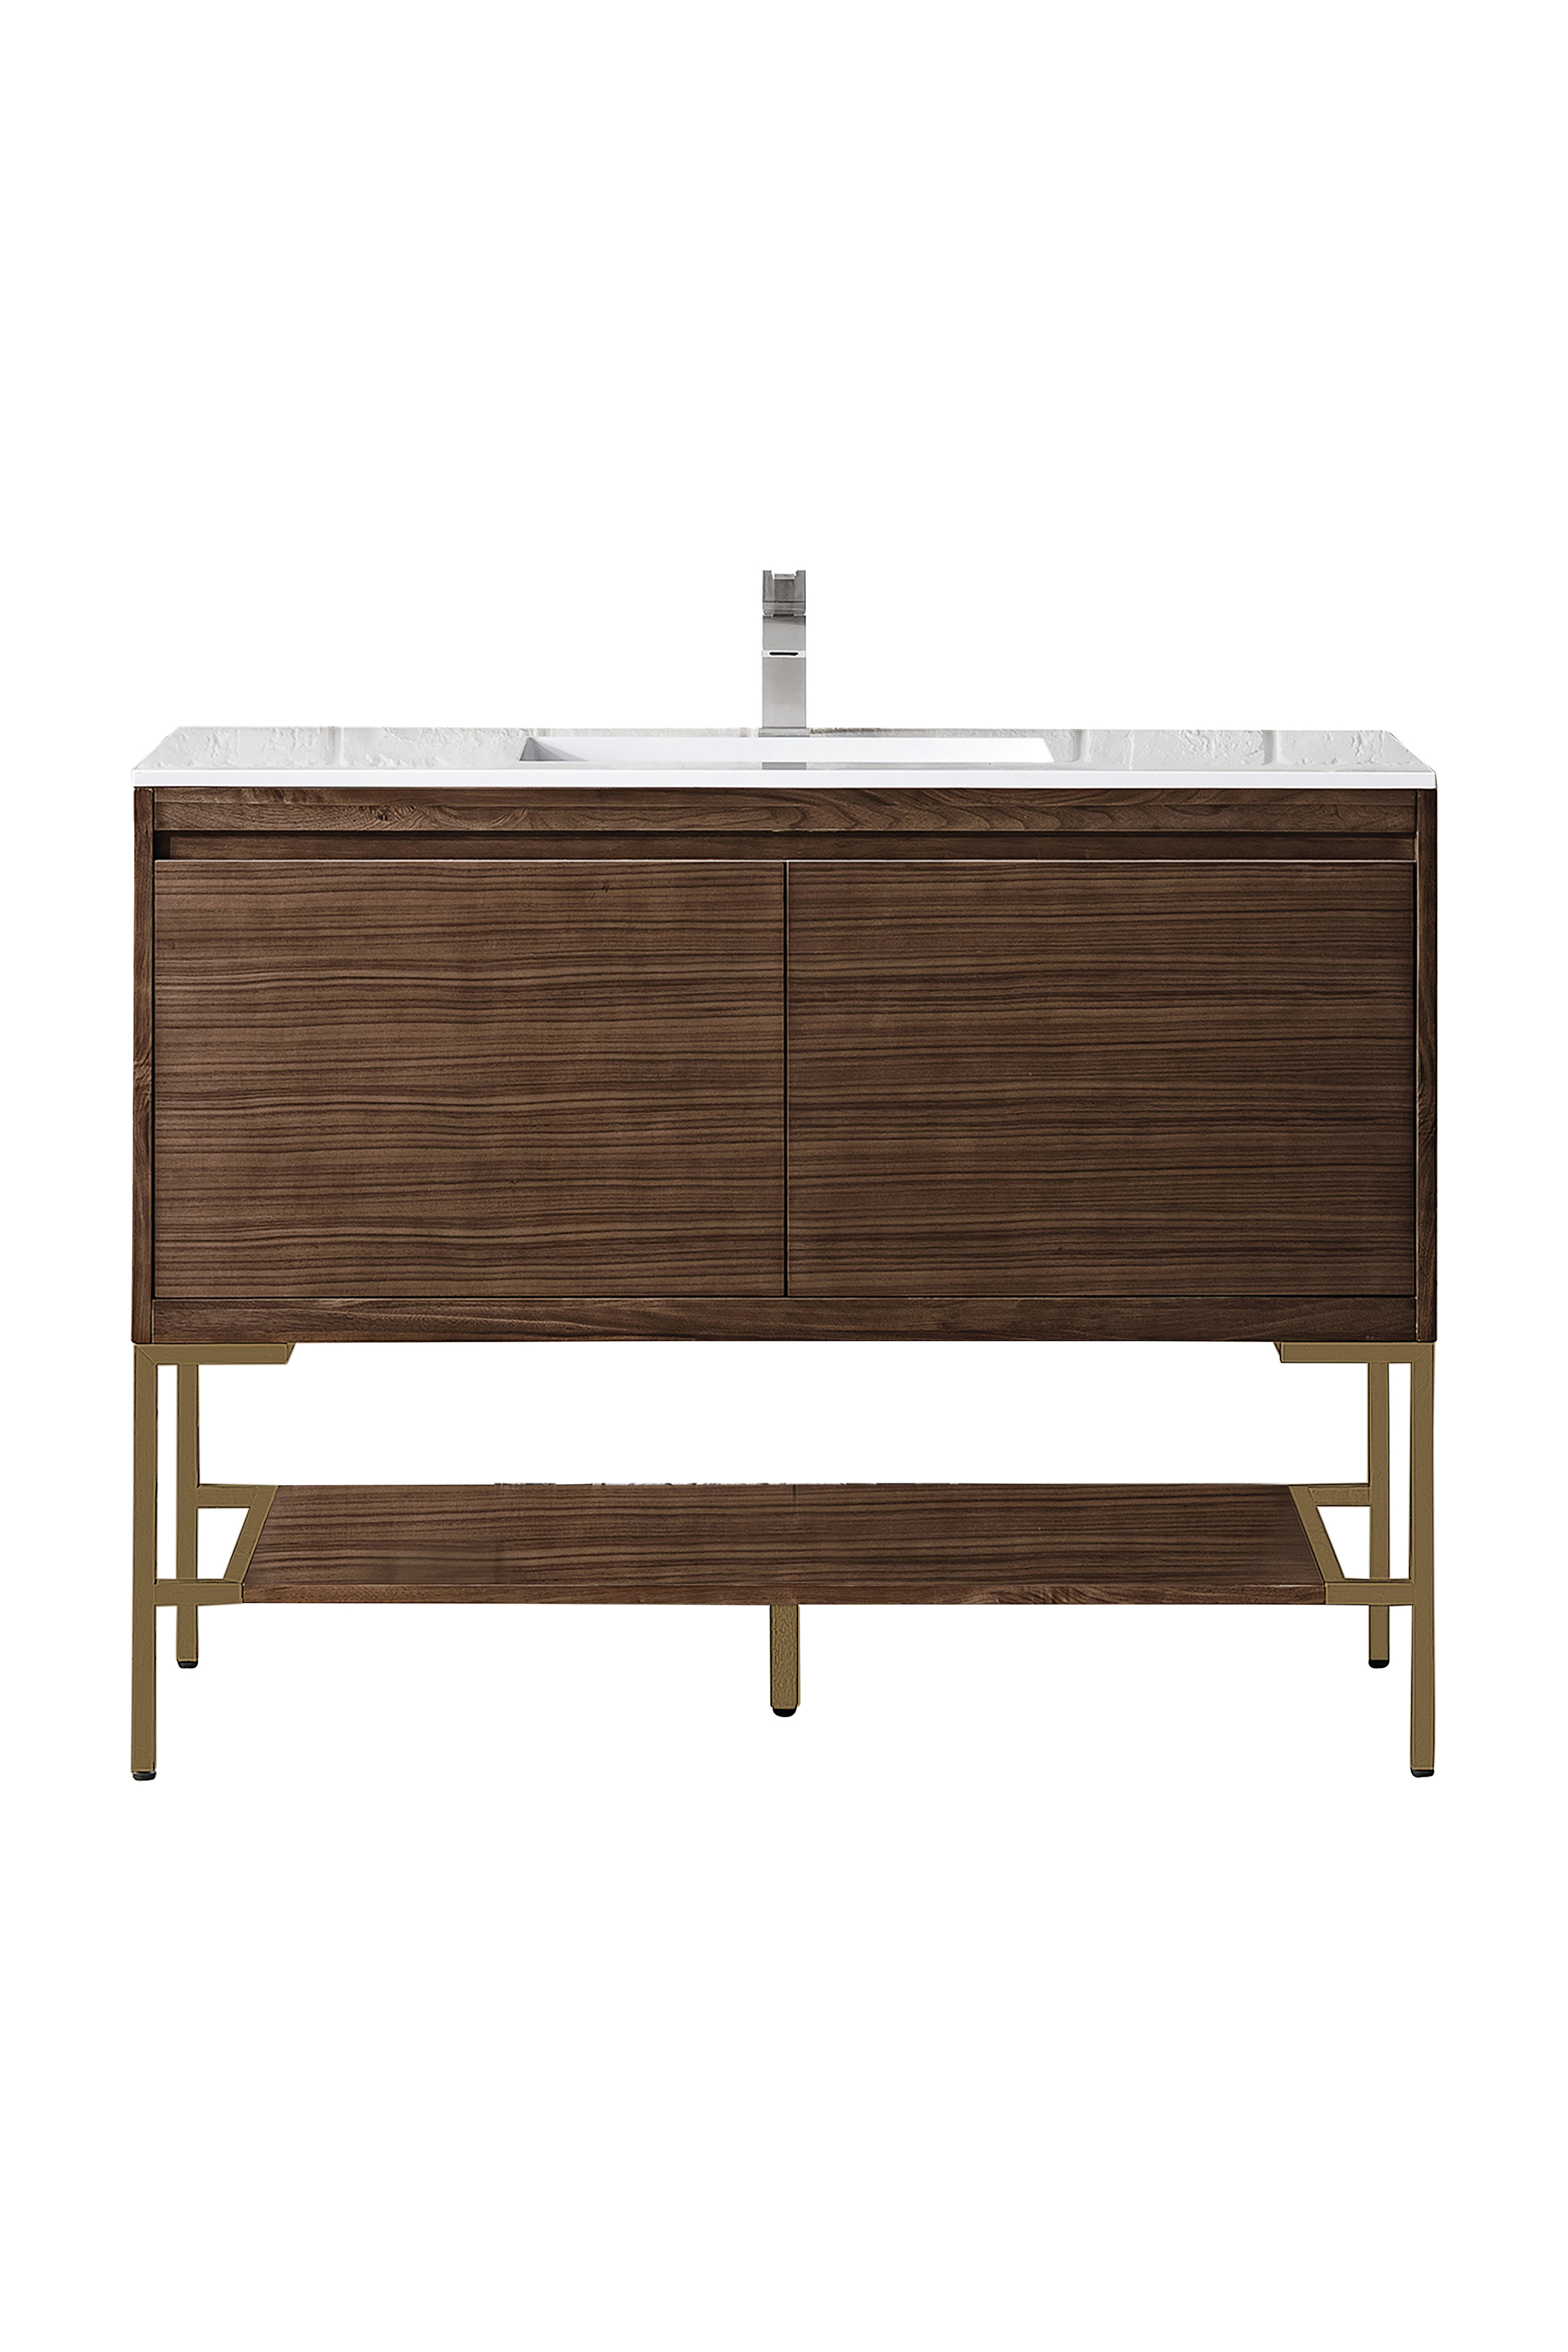 James Martin 801V47.3WLTRGDGW Milan 47.3" Single Vanity Cabinet, Mid Century Walnut, Radiant Gold w/Glossy White Composite Top